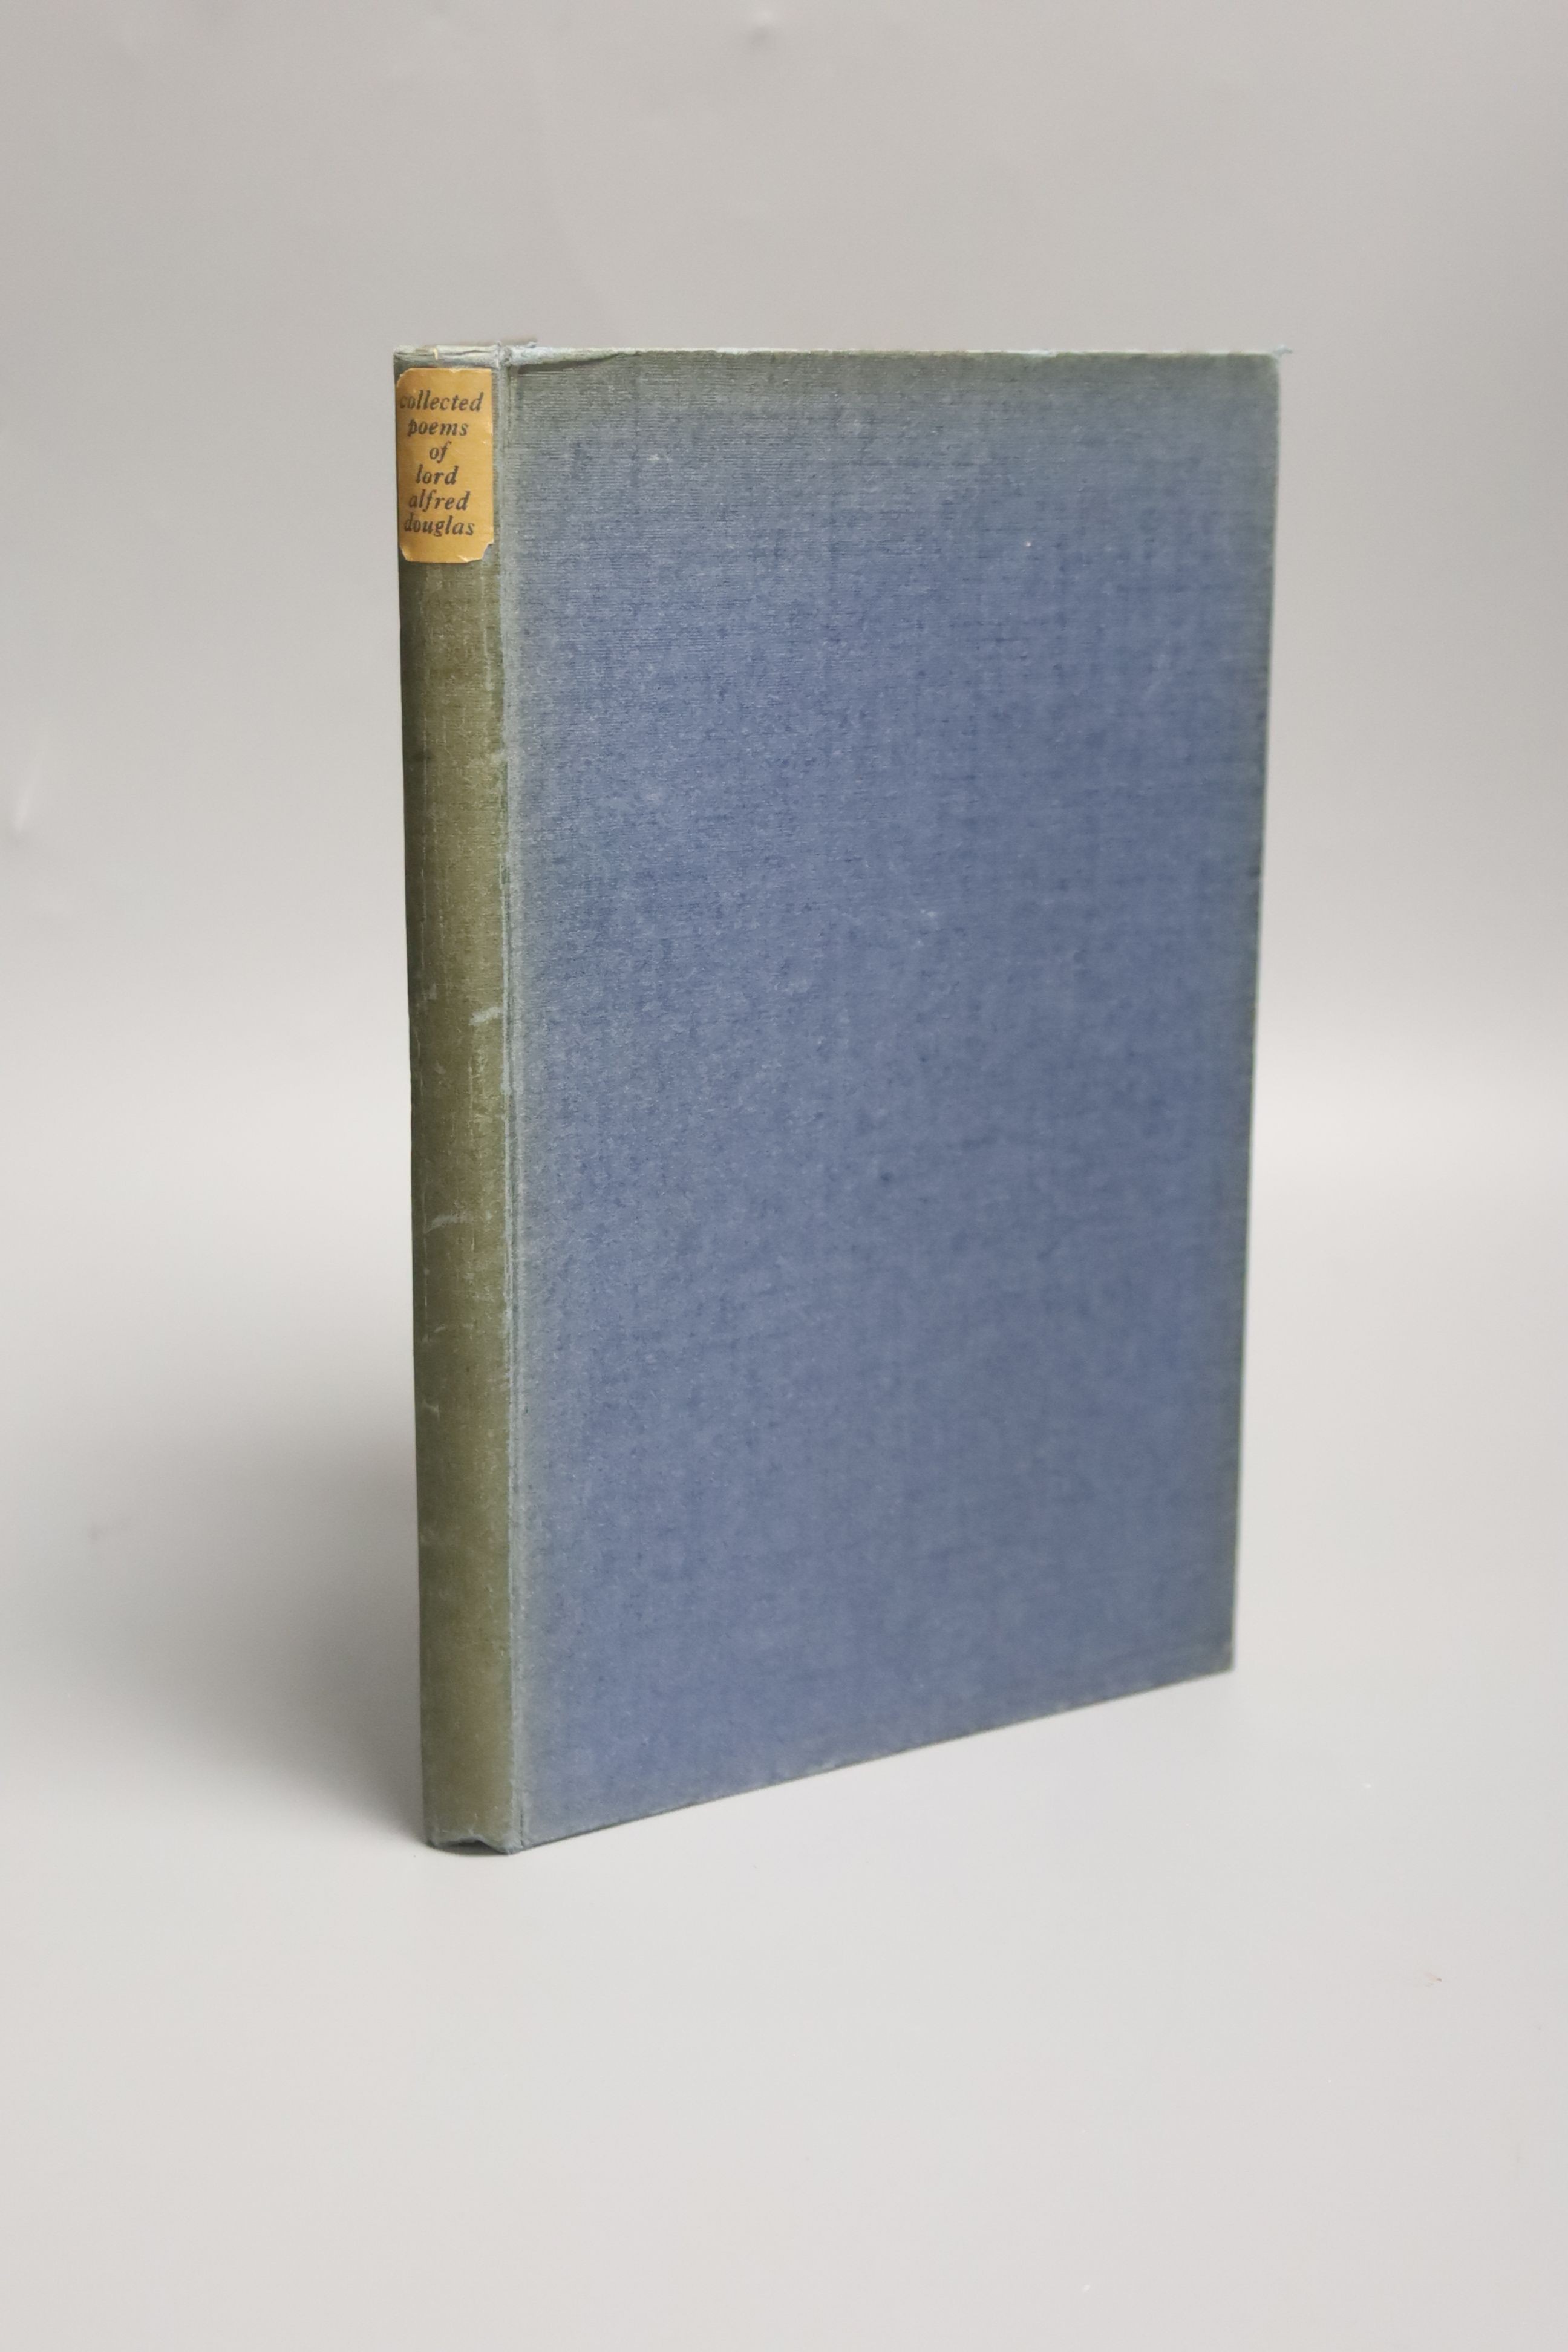 The collected poems of Lord Alfred Douglas 74/200, signed by the author